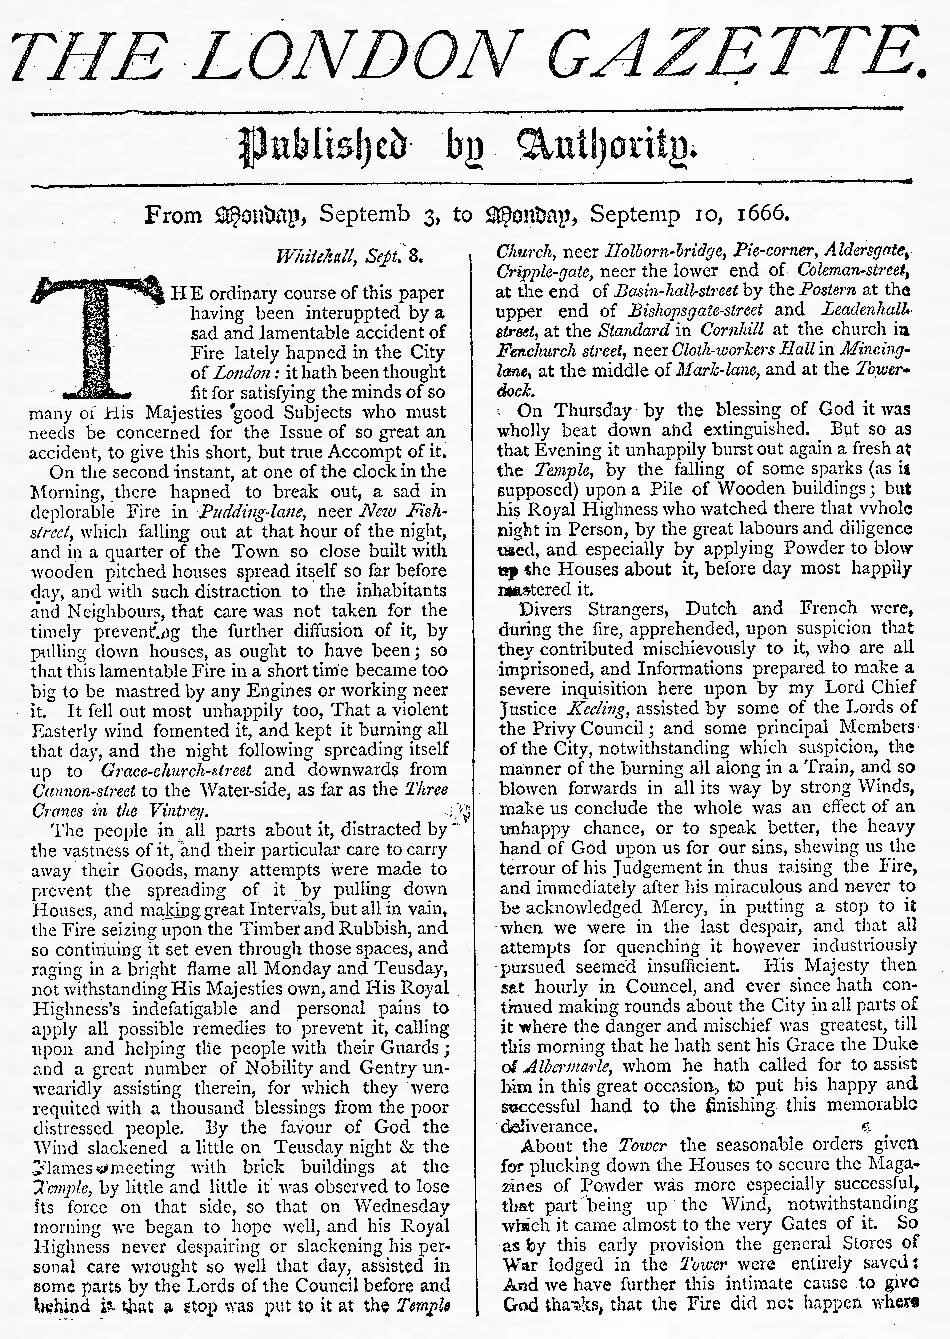 The London Gazette report on the Great Fire of London 1666, page 1